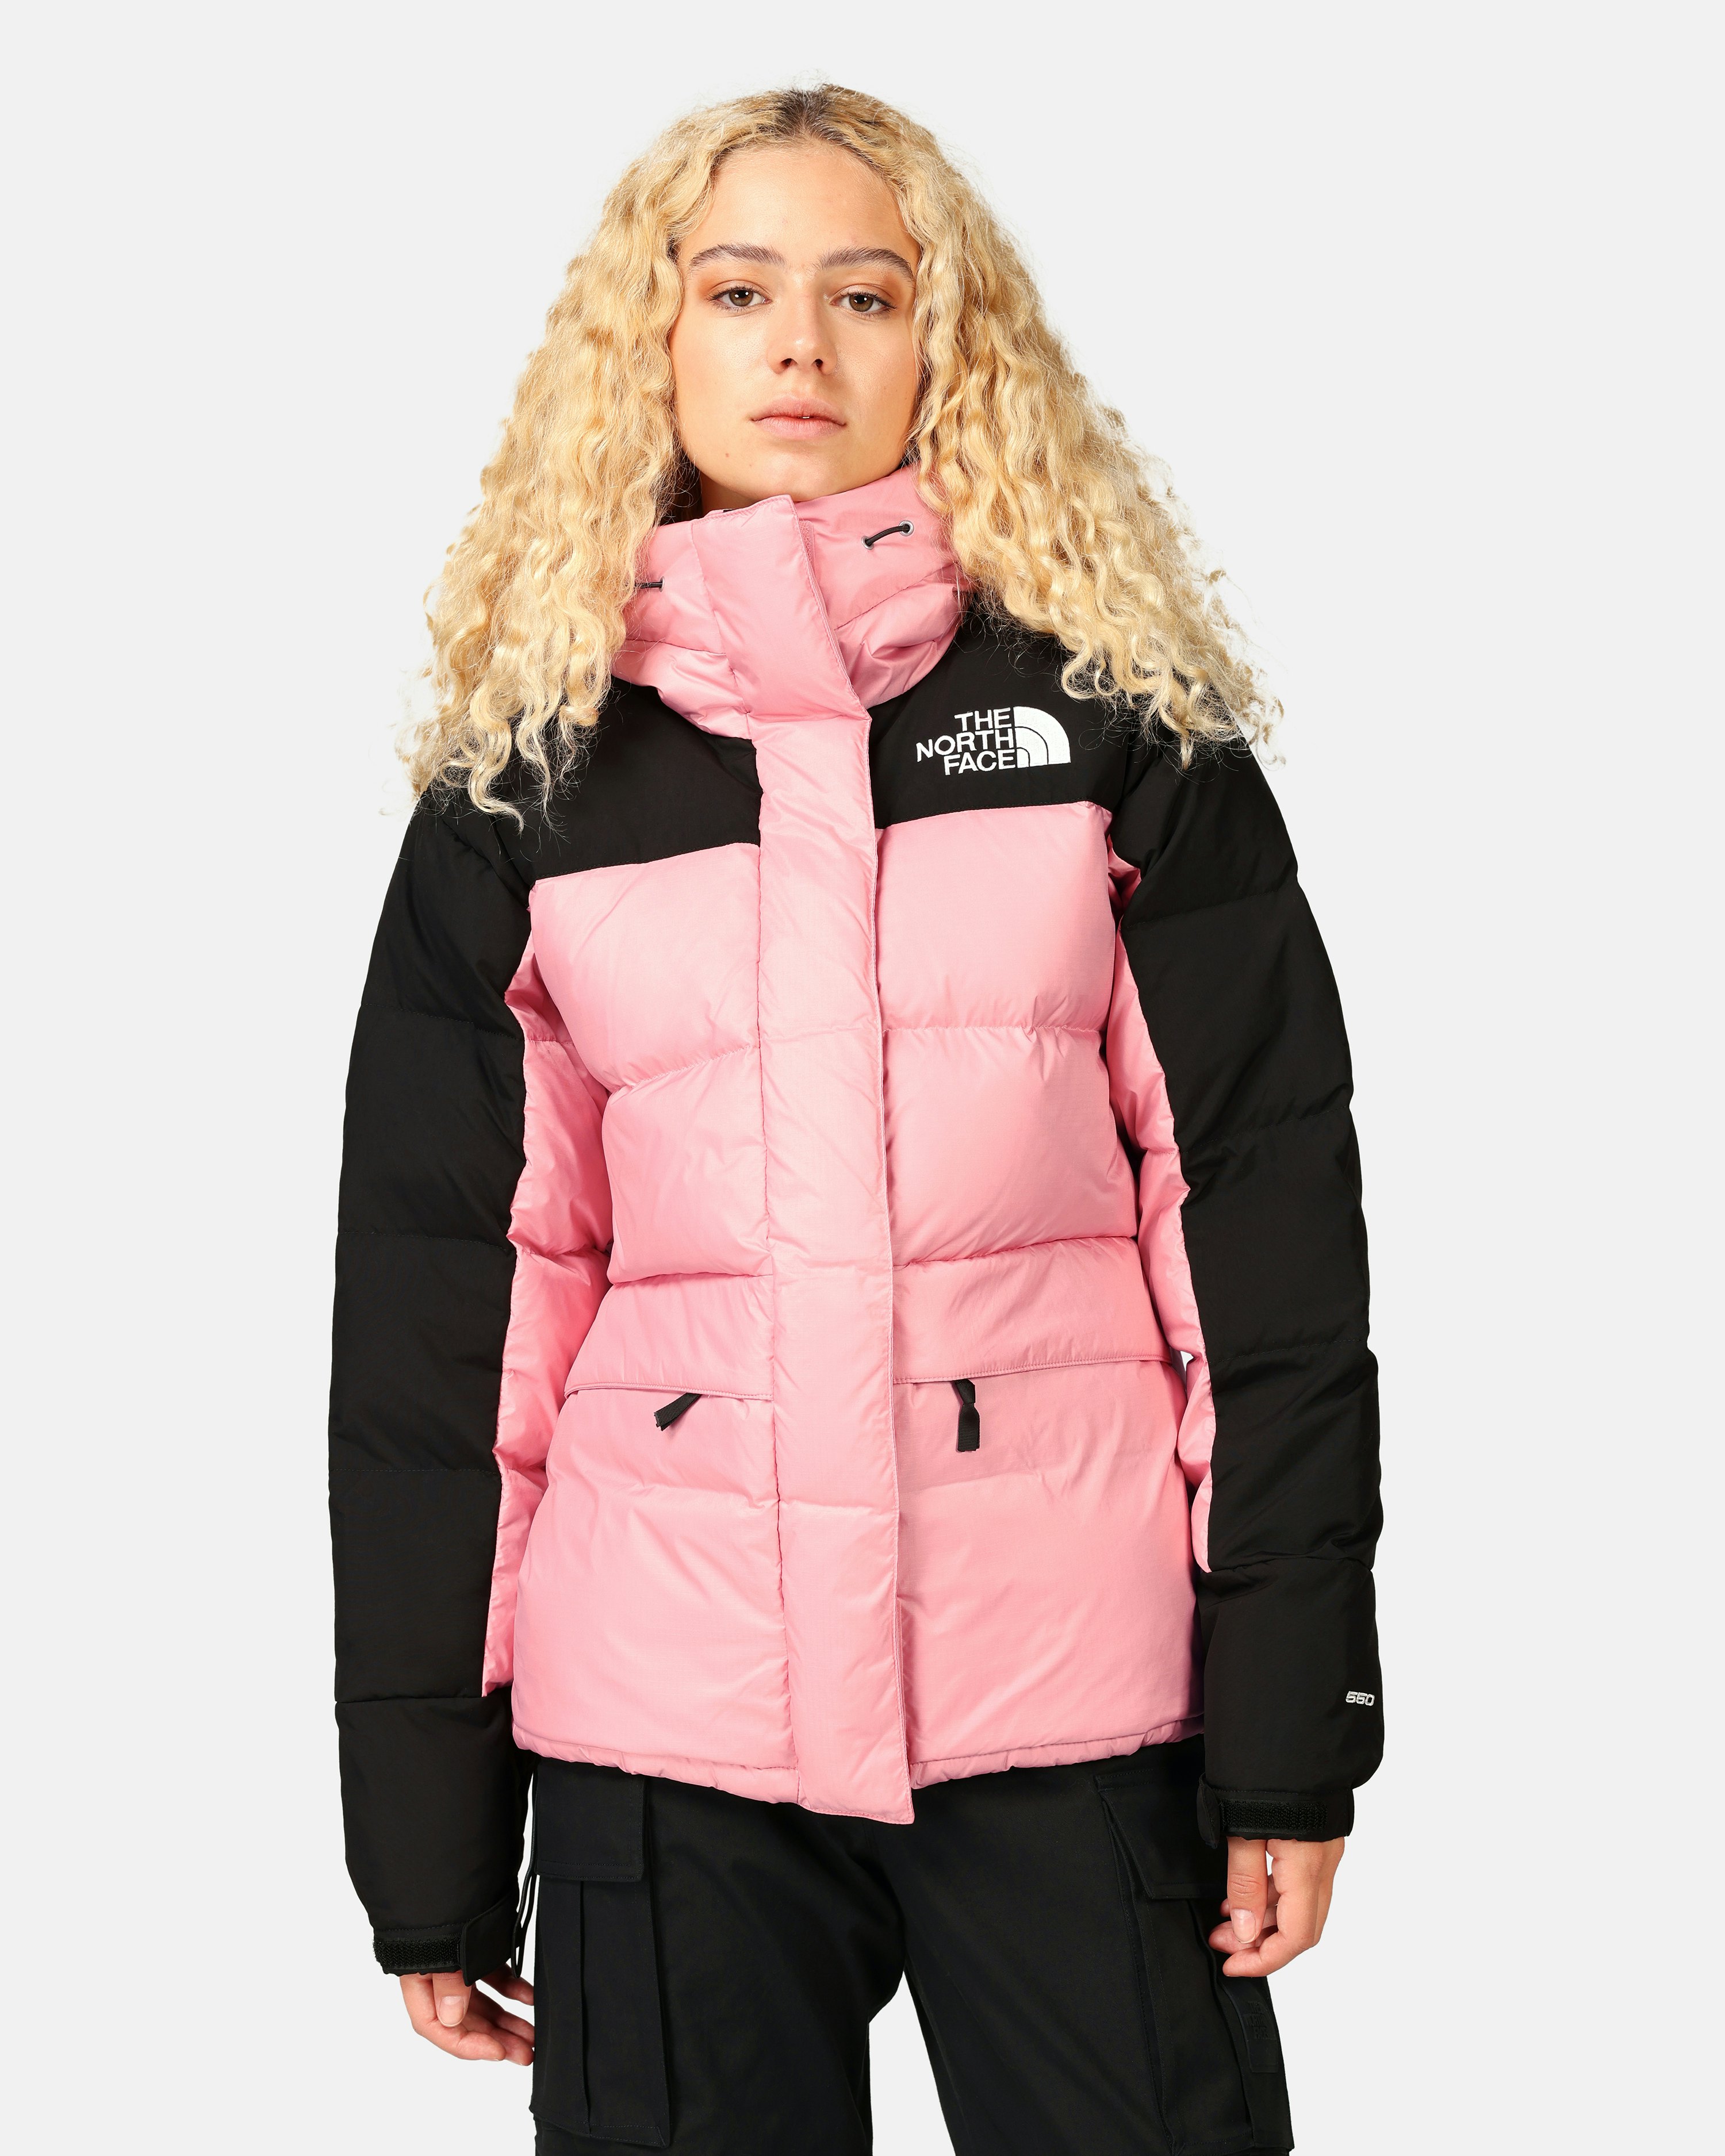 The North Face Himalayan Down Parka Pink, Women